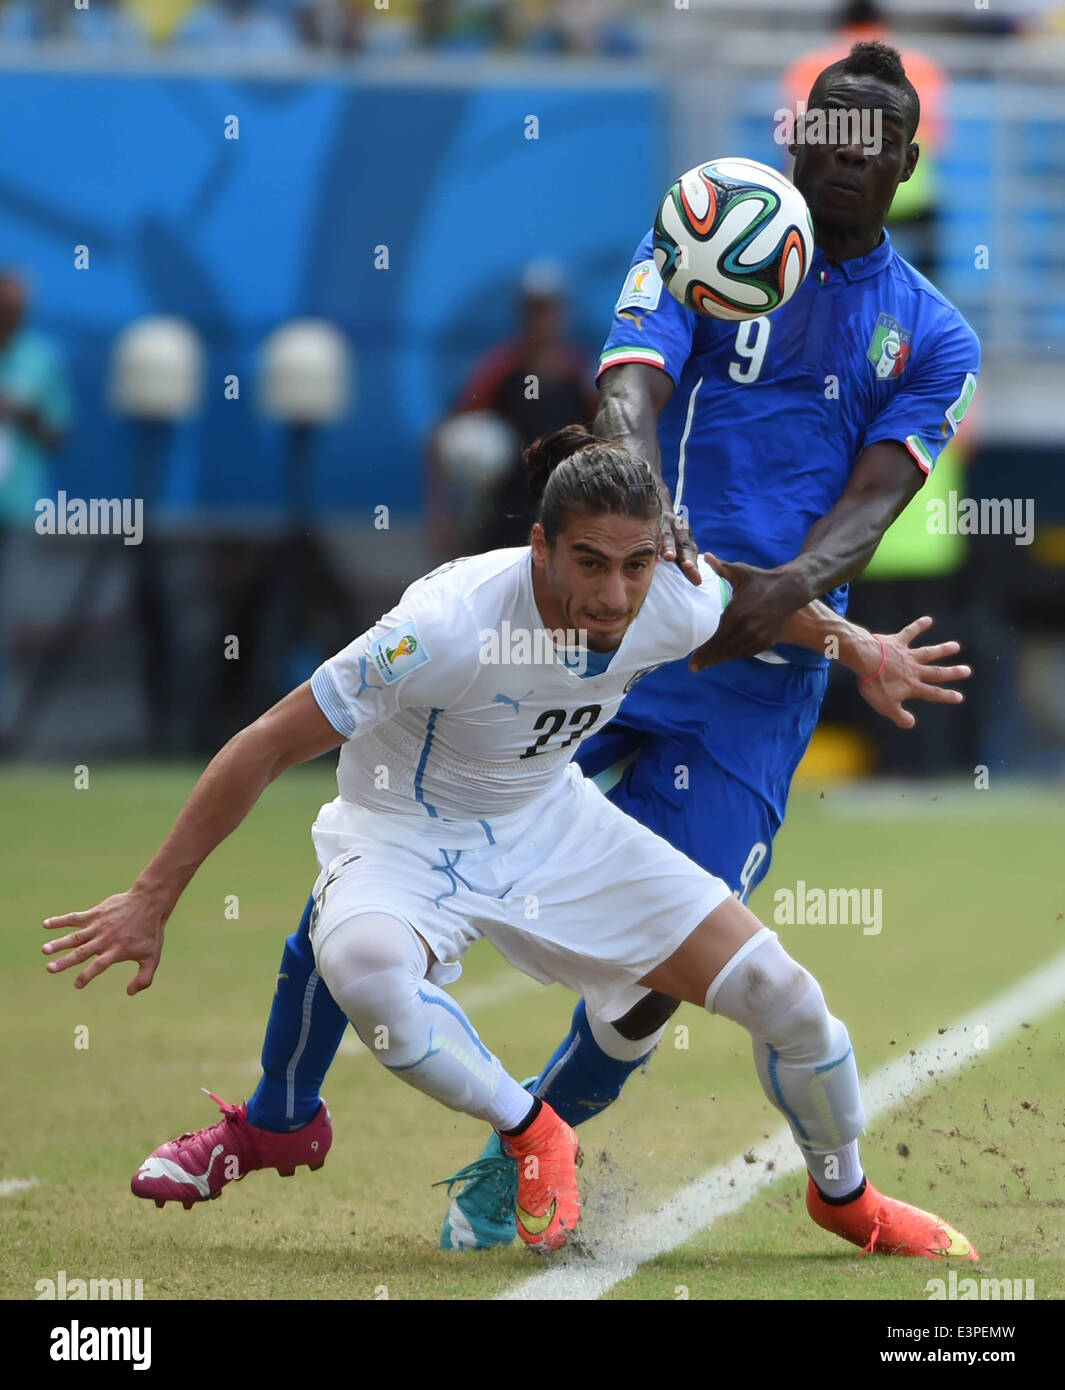 Natal, Brazil. 24th June, 2014. Italy's Mario Balotelli vies with Uruguay's Martin Caceres during a Group D match between Italy and Uruguay of 2014 FIFA World Cup at the Estadio das Dunas Stadium in Natal, Brazil, June 24, 2014. © Guo Yong/Xinhua/Alamy Live News Stock Photo